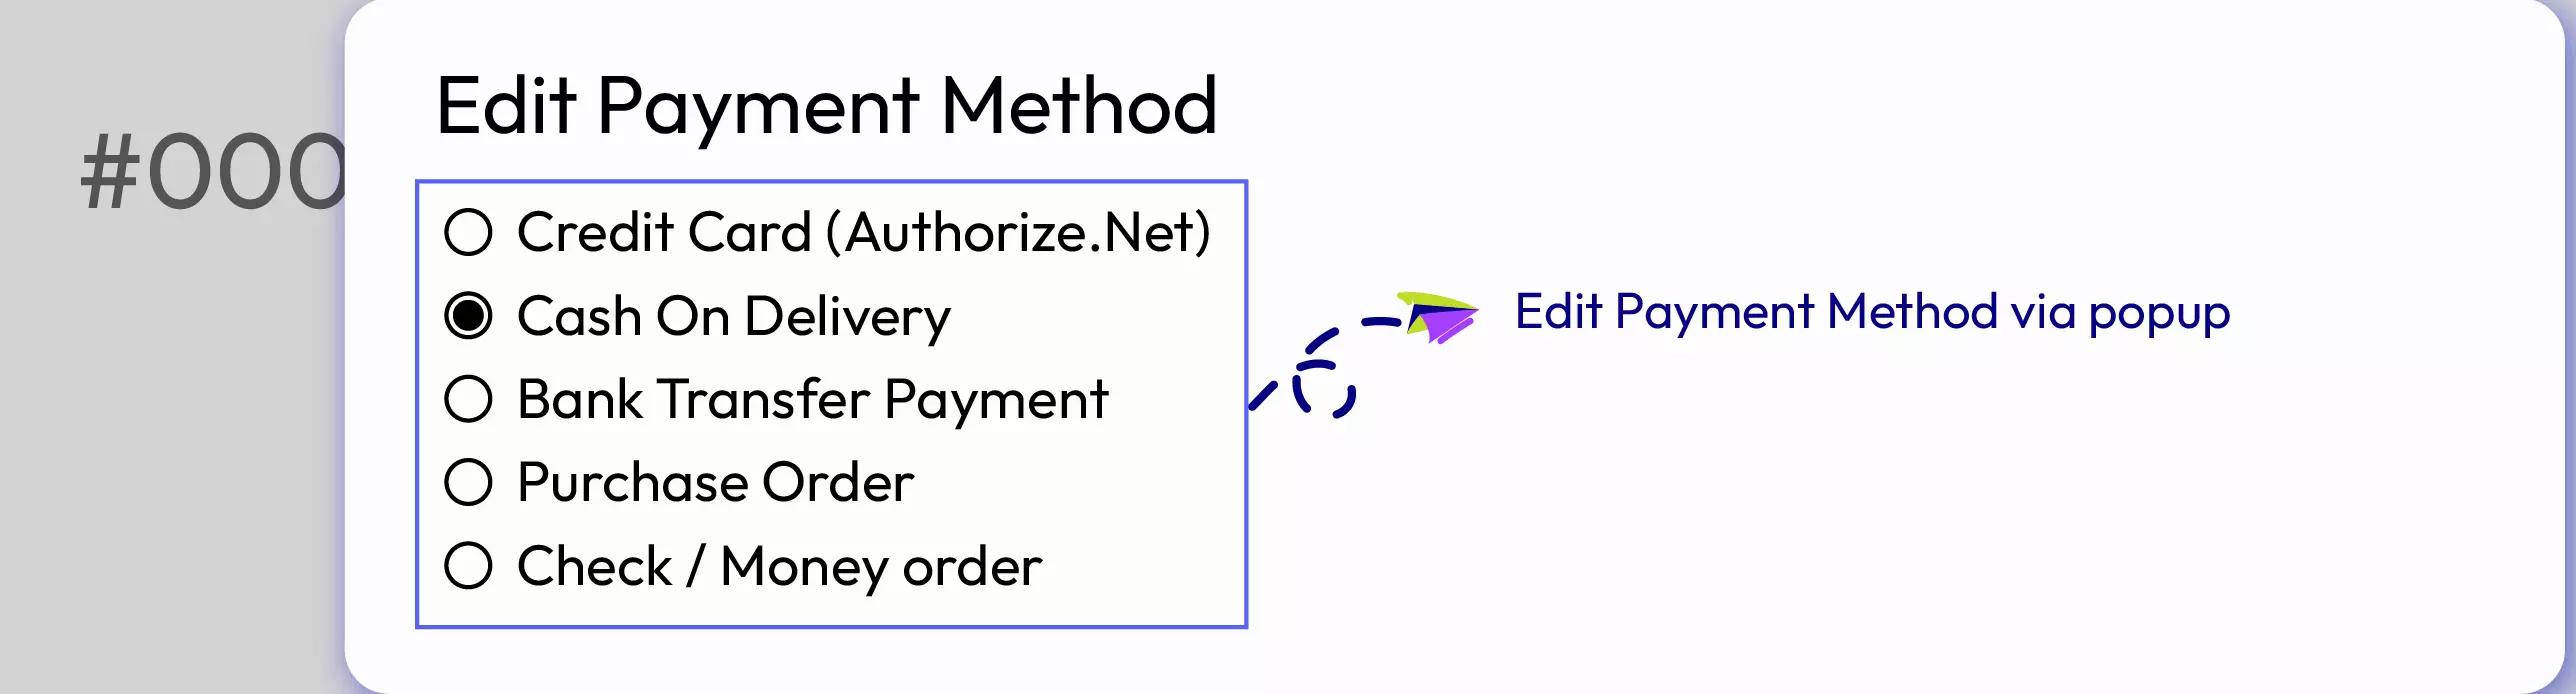 use-case4-adjust-the-payment-of-magento2-edit-order-extension